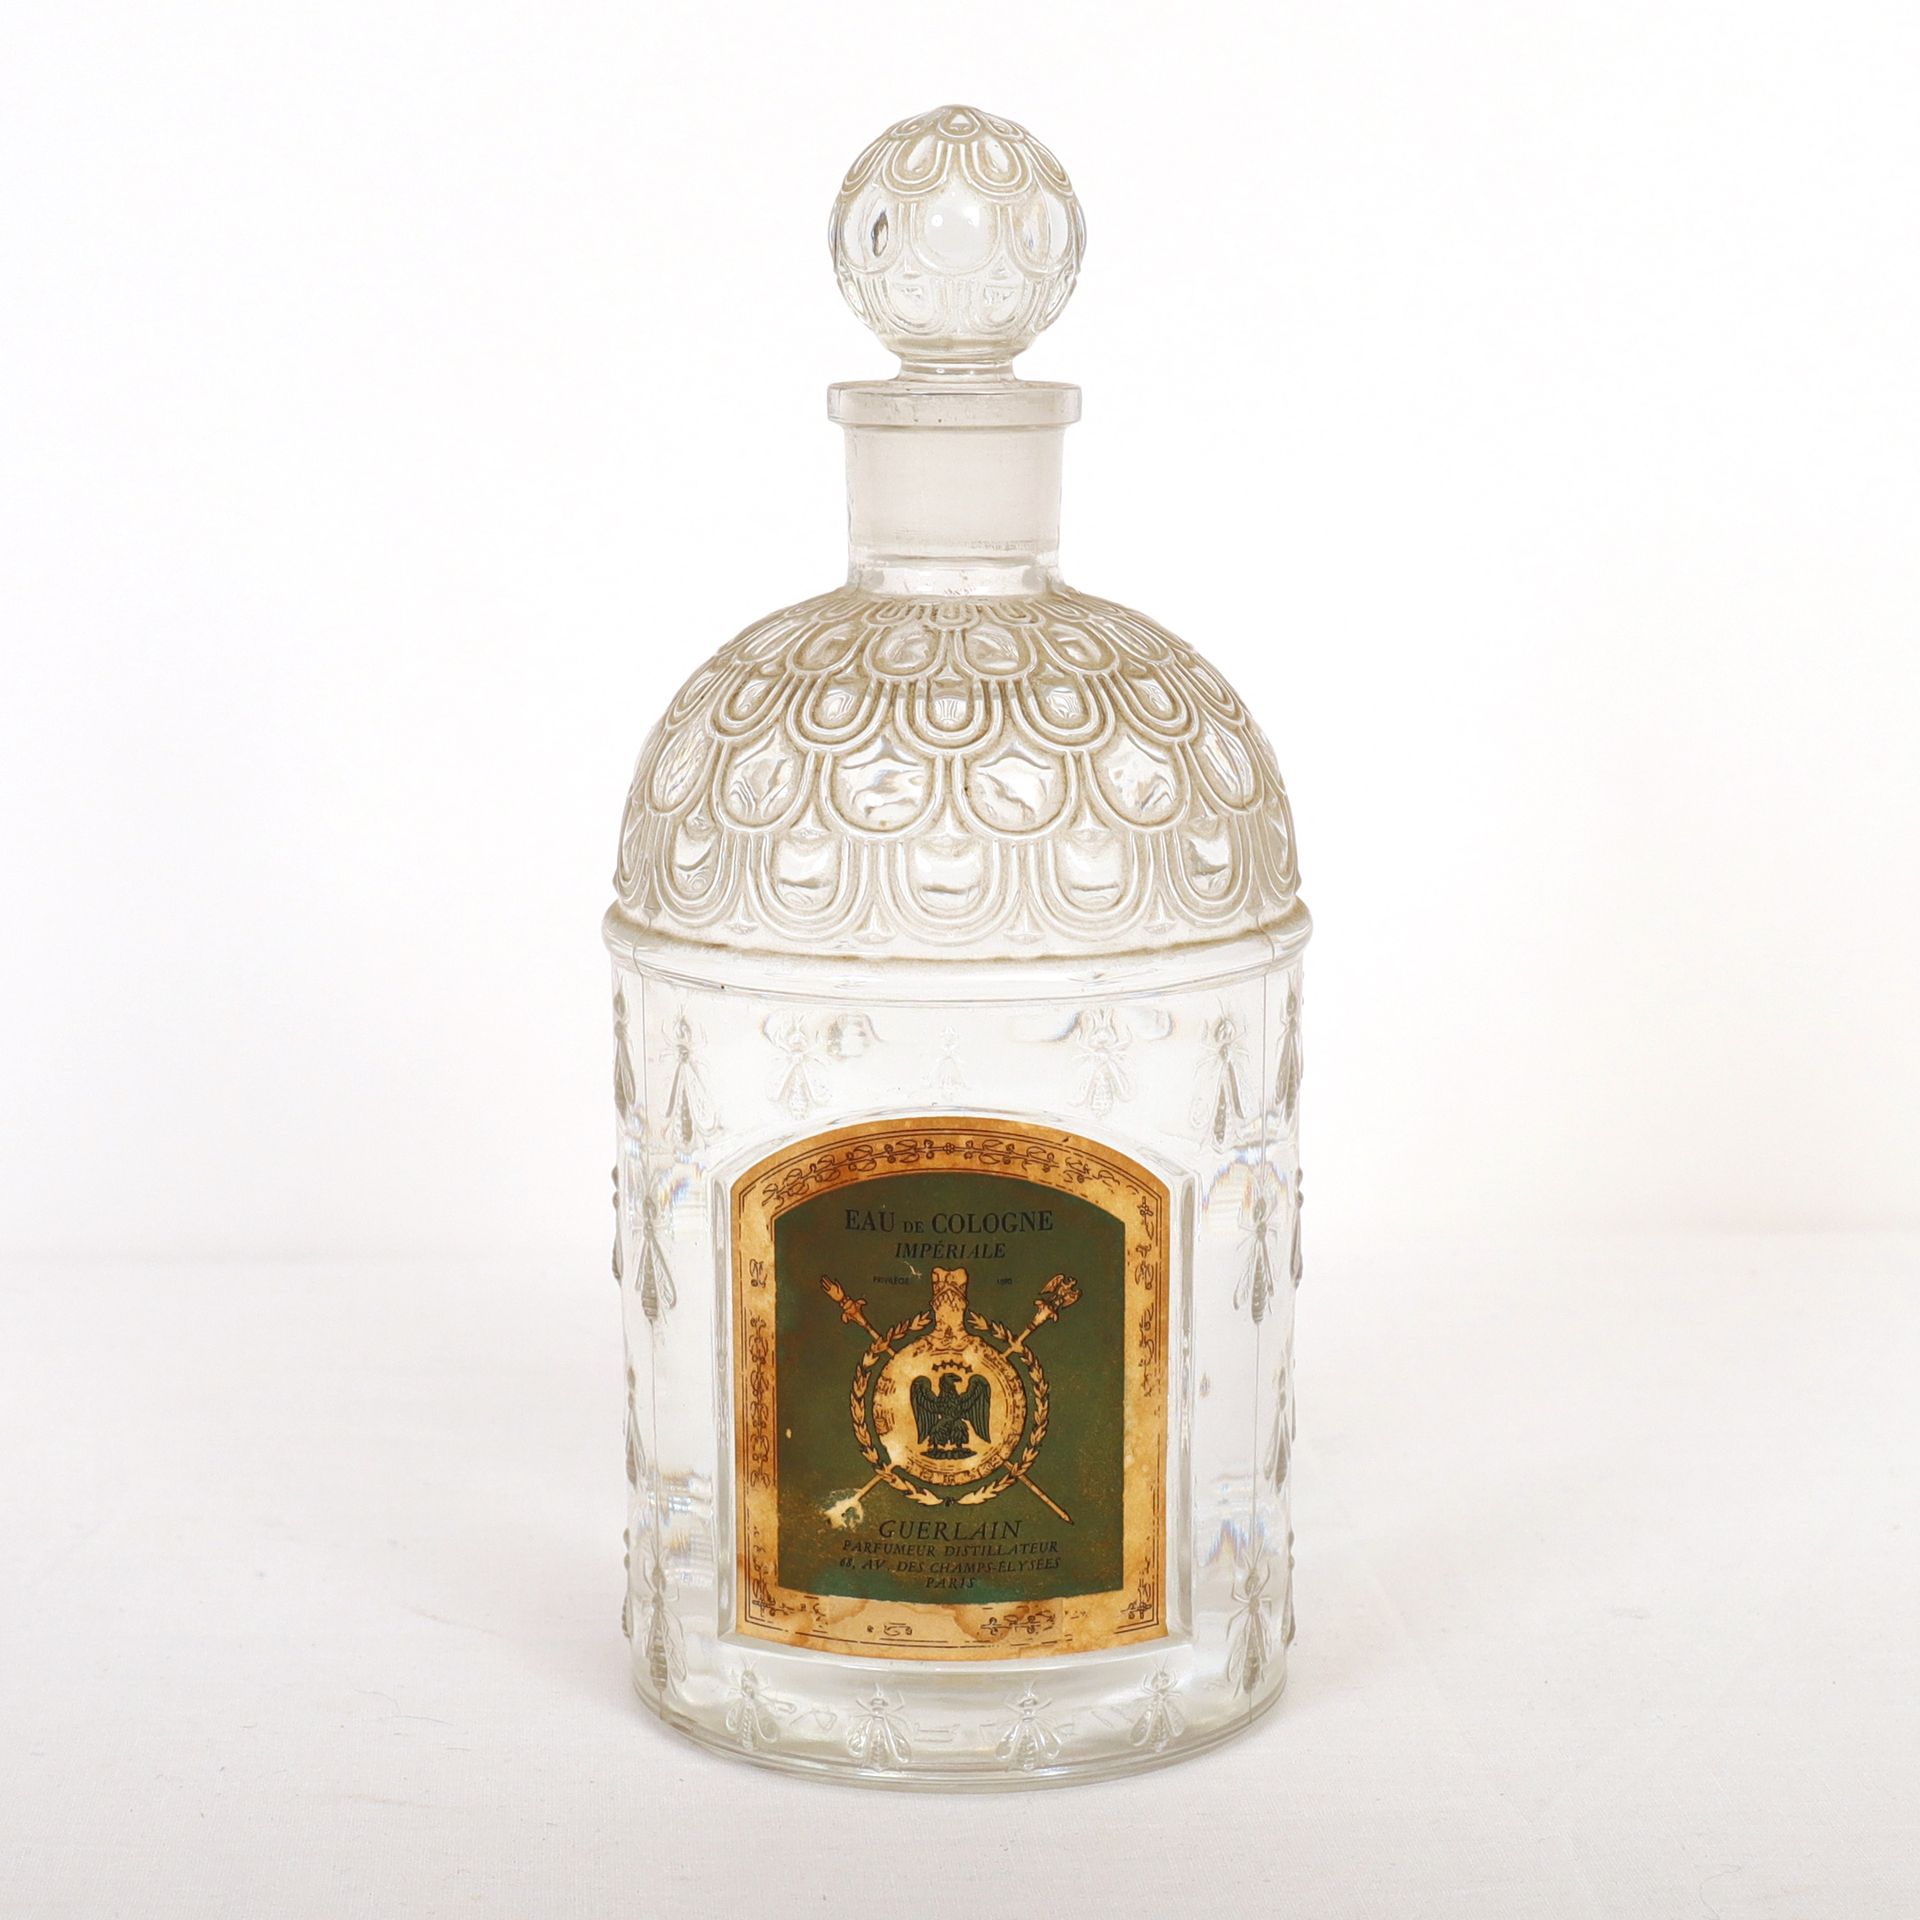 Null LARGE GUERLAIN BOTTLE WITH BEES in glass

Imperial Eau de Cologne

Made in &hellip;